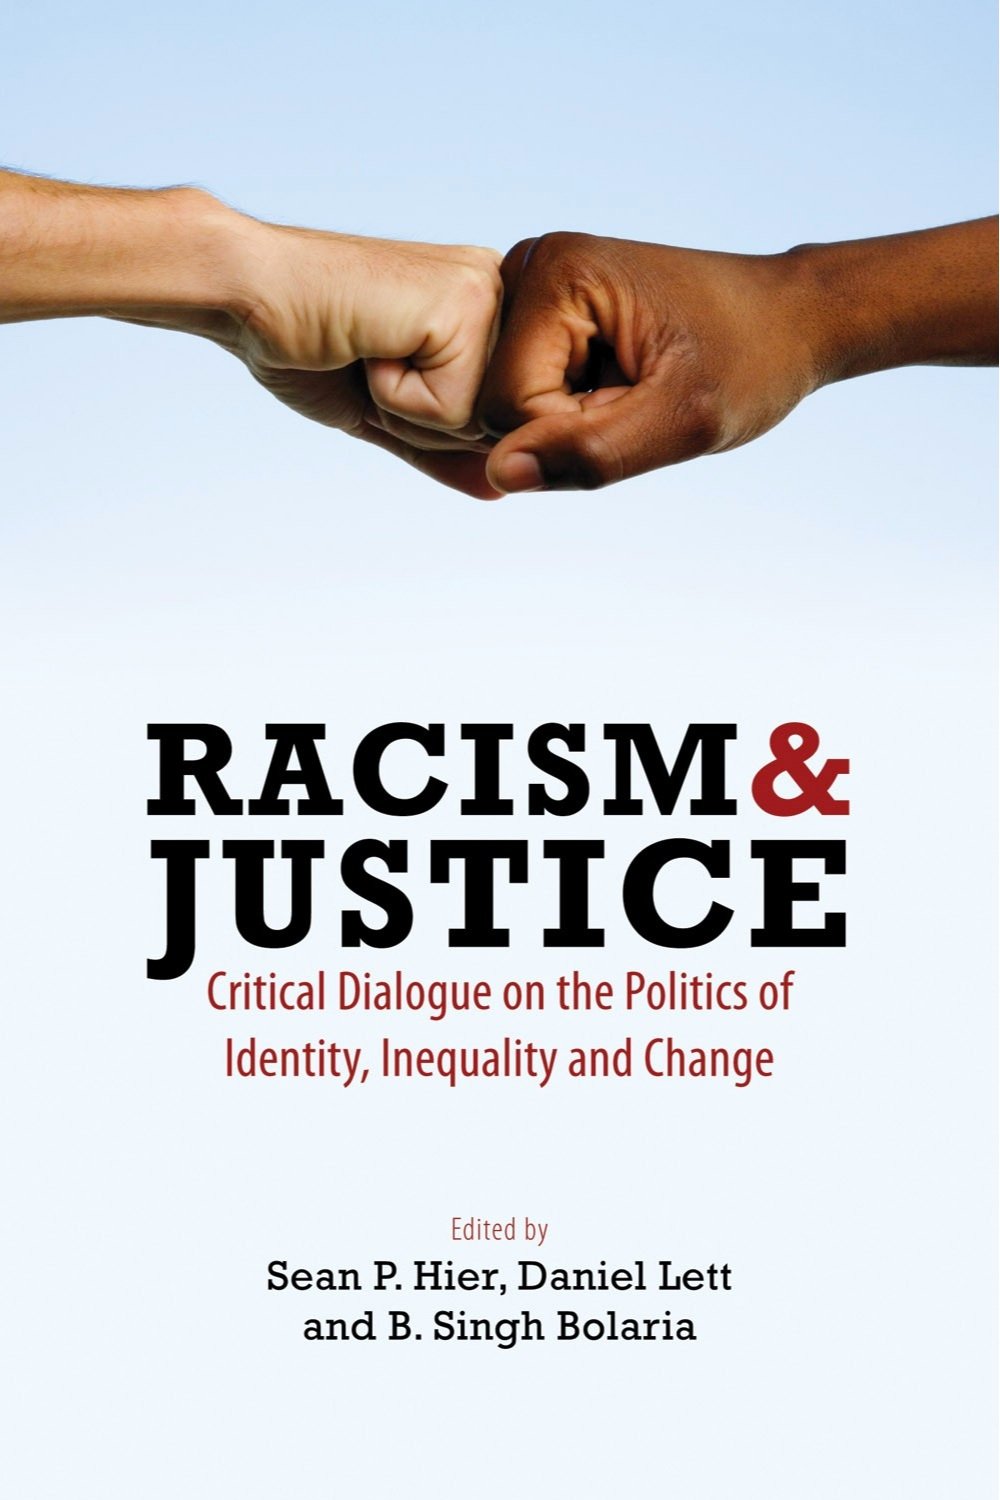 Racism &amp; Justice: Critical Dialogue on the Politics of Identity, Inequality and Change